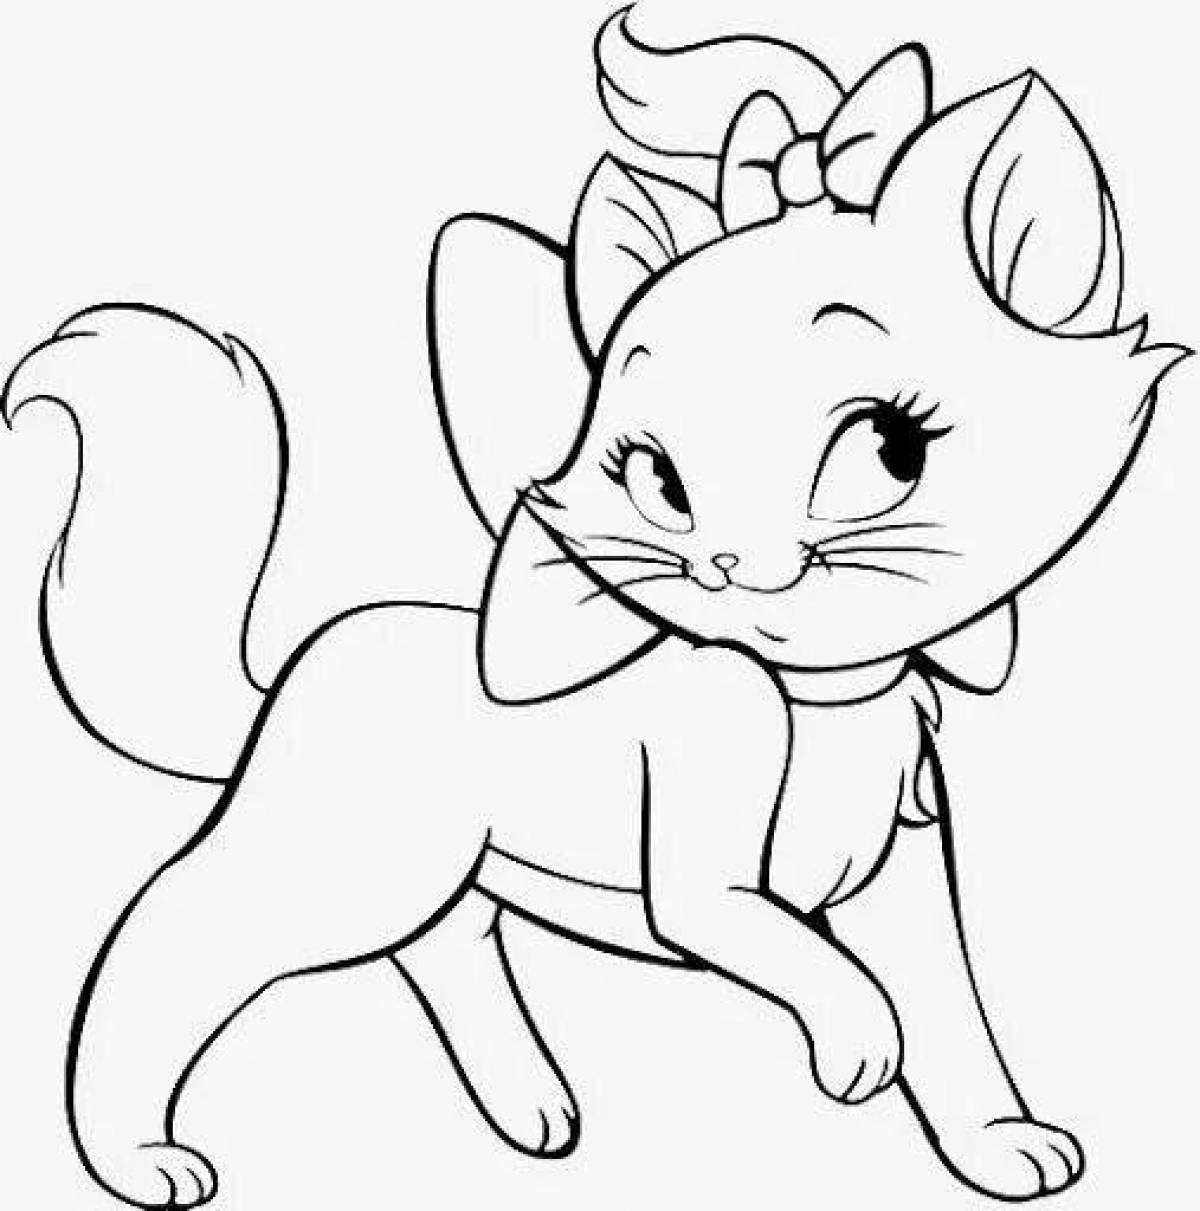 Animated marie kitty coloring book